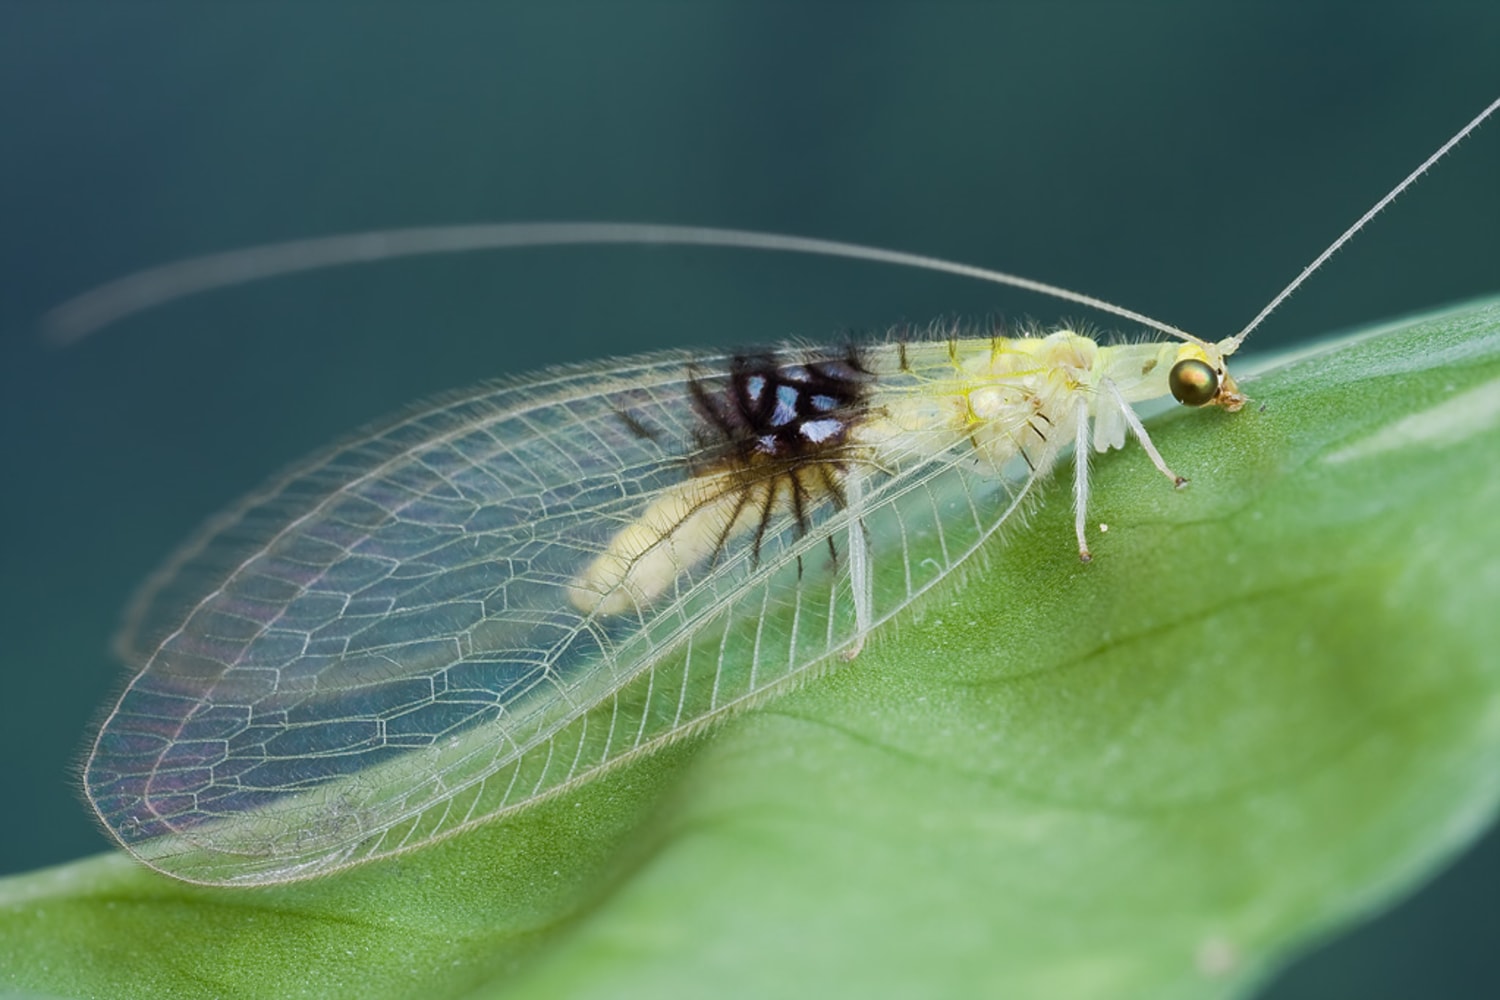 New insect discovered via photo-sharing site Flickr